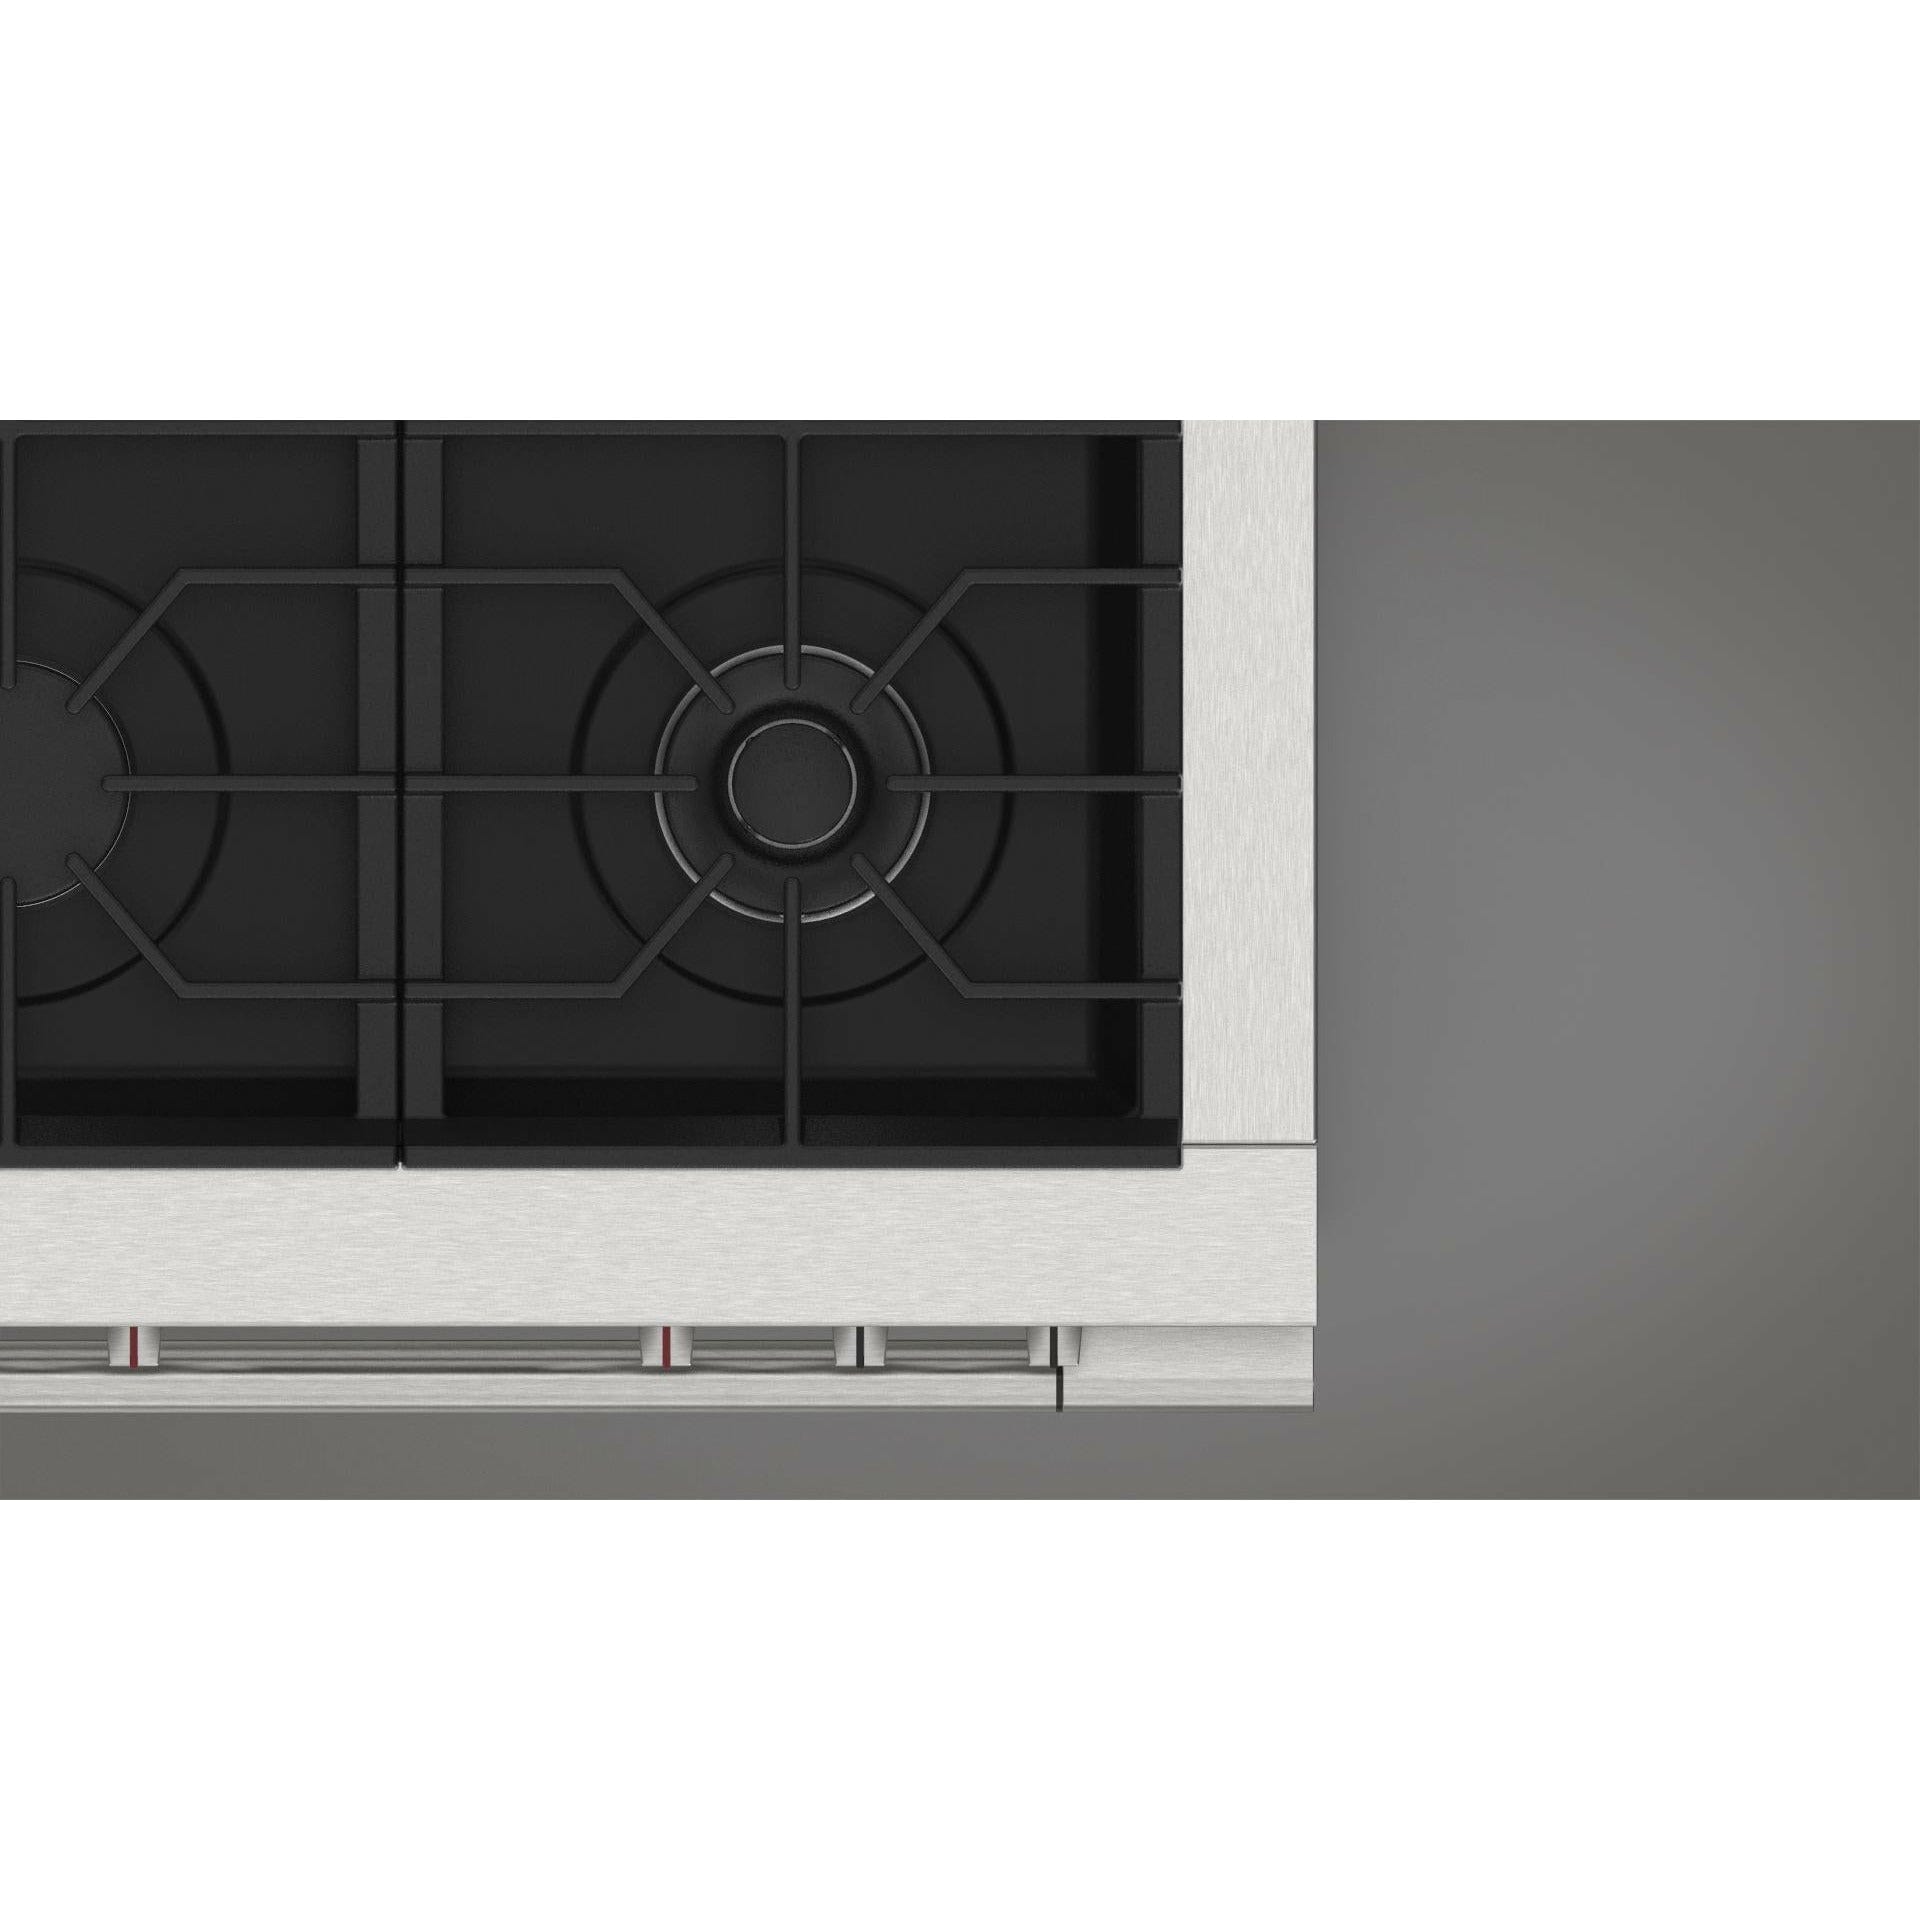 Fulgor Milano 30" Freestanding All Gas Range with 2 Duel Flame Burners, Stainless Steel - F4PGR304S2 Ranges Luxury Appliances Direct